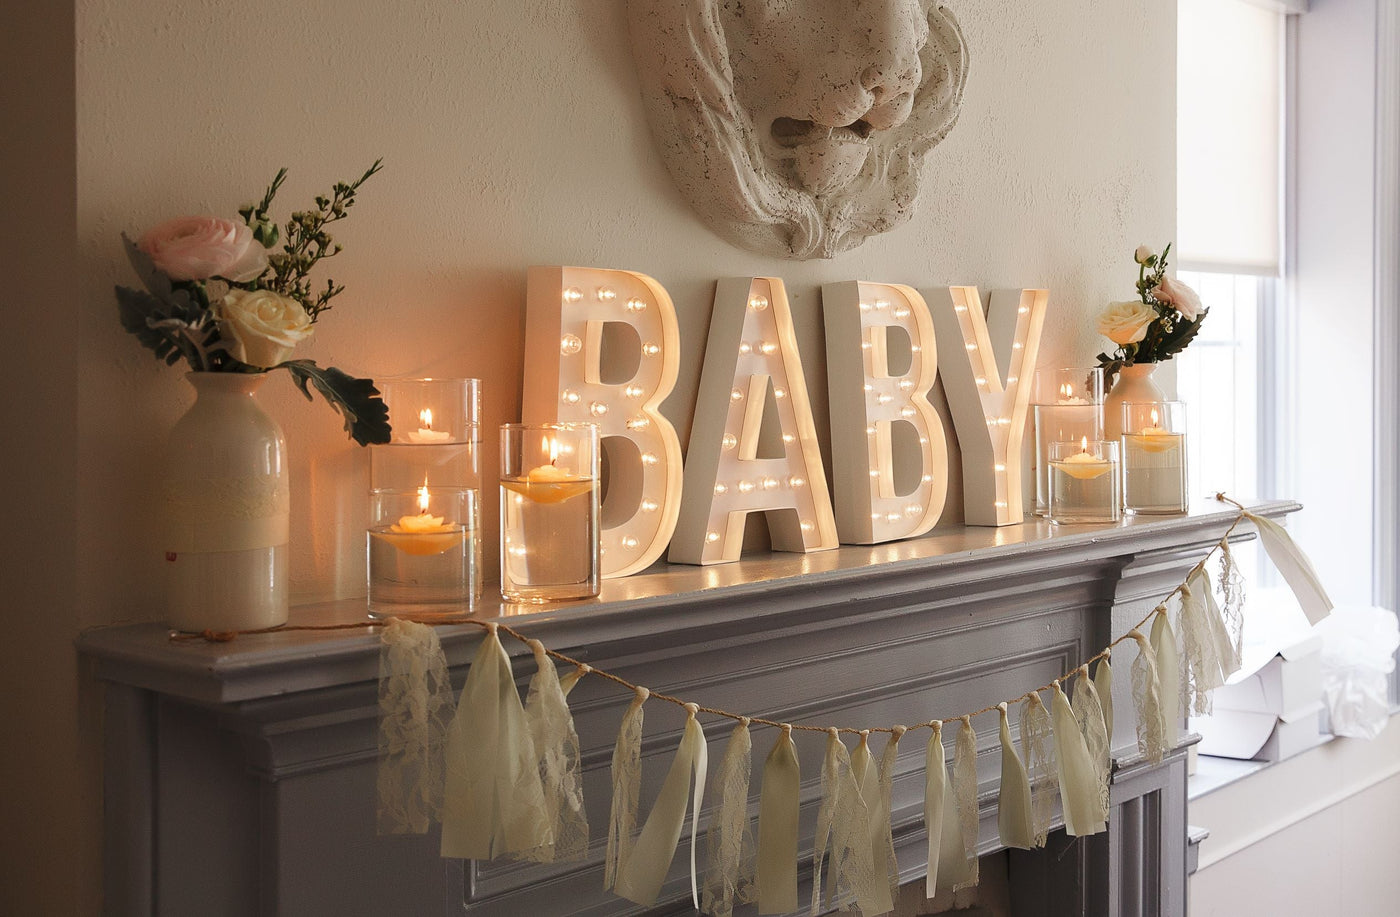 Light up box words spelling BABY on fireplace mantel